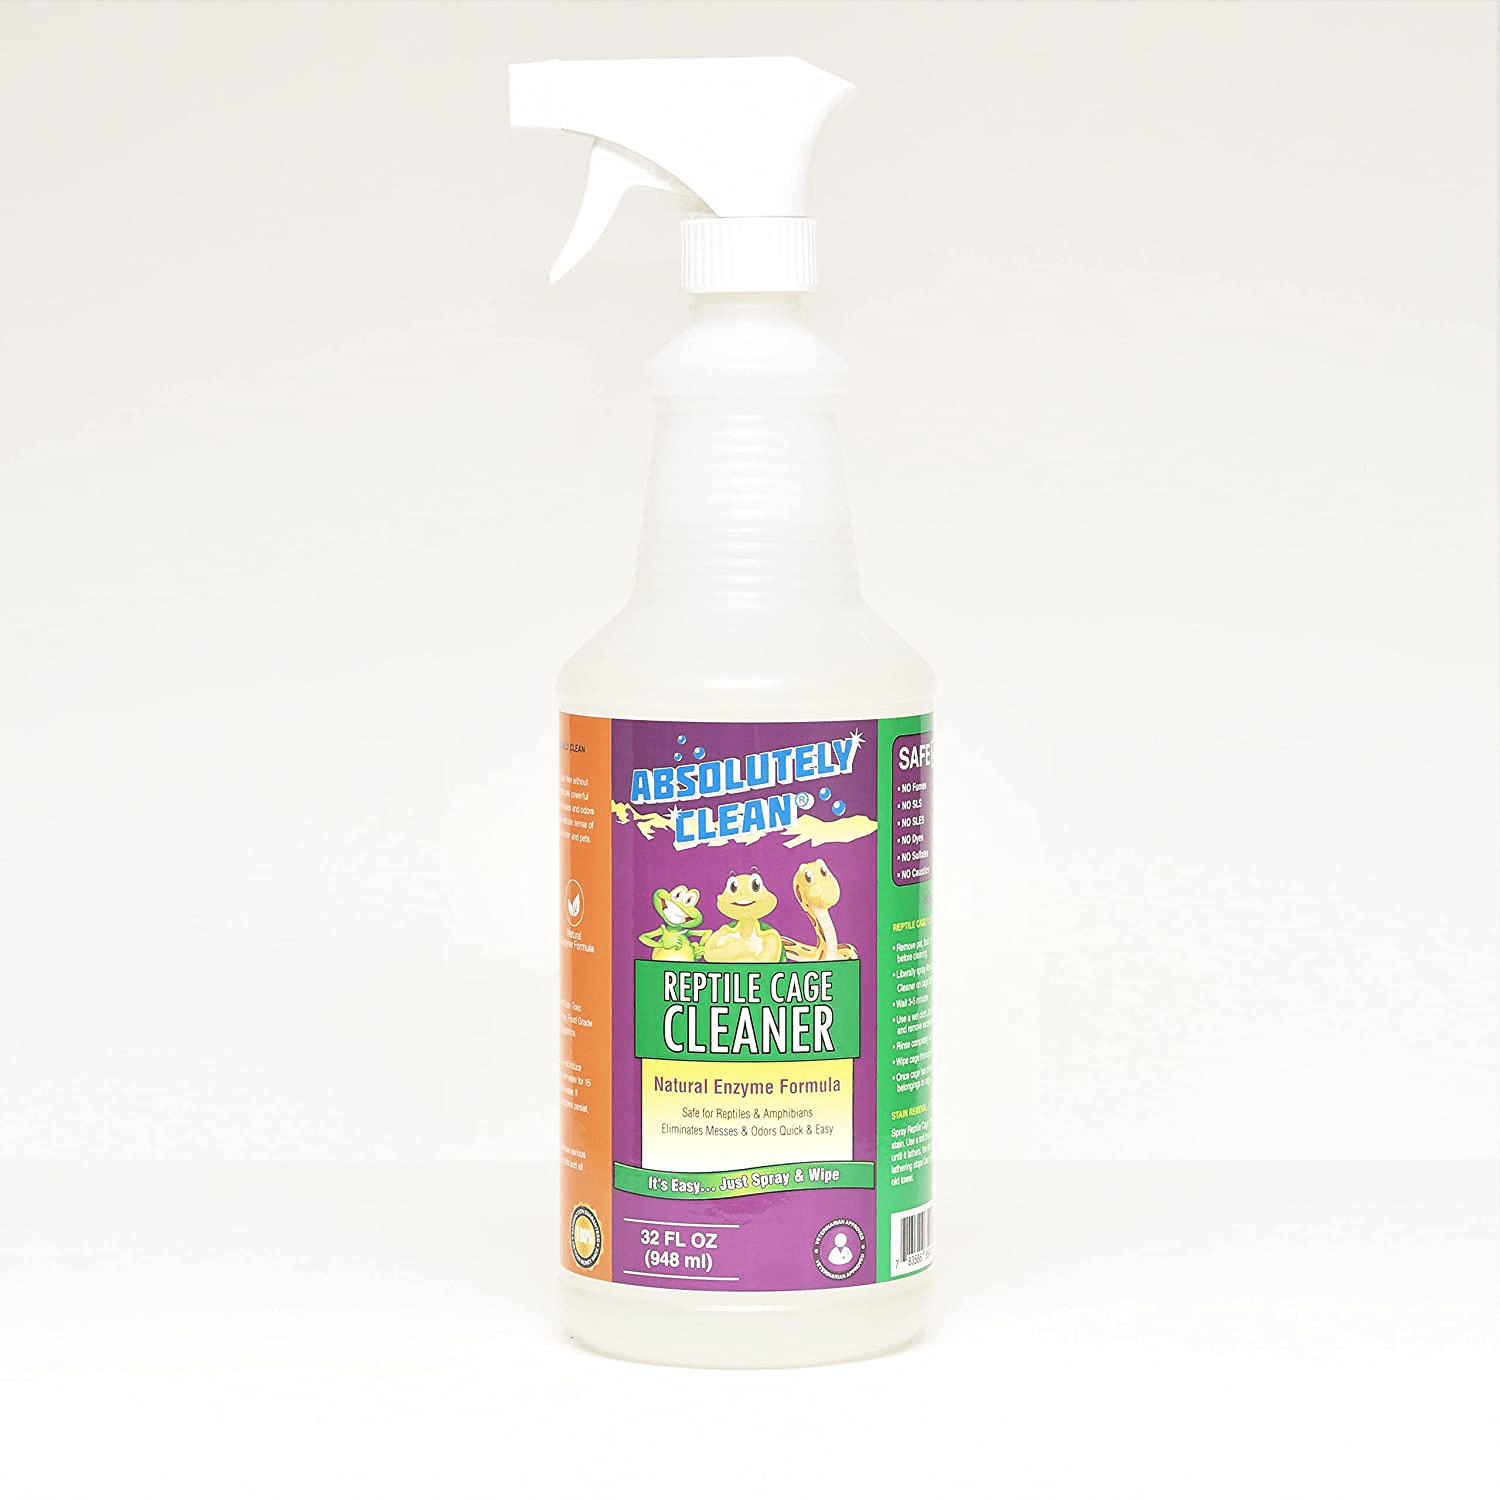 Absolutely Clean Amazing Reptile & Amphibian Terrarium Cleaner and Deodorizer - Just Spray/Wipe - Safely & Easily Removes Reptile & Amphibian Messes - USA Made Animals & Pet Supplies > Pet Supplies > Reptile & Amphibian Supplies > Reptile & Amphibian Habitat Accessories Absolutely Clean 32oz Spray Bottle - Save 25%  